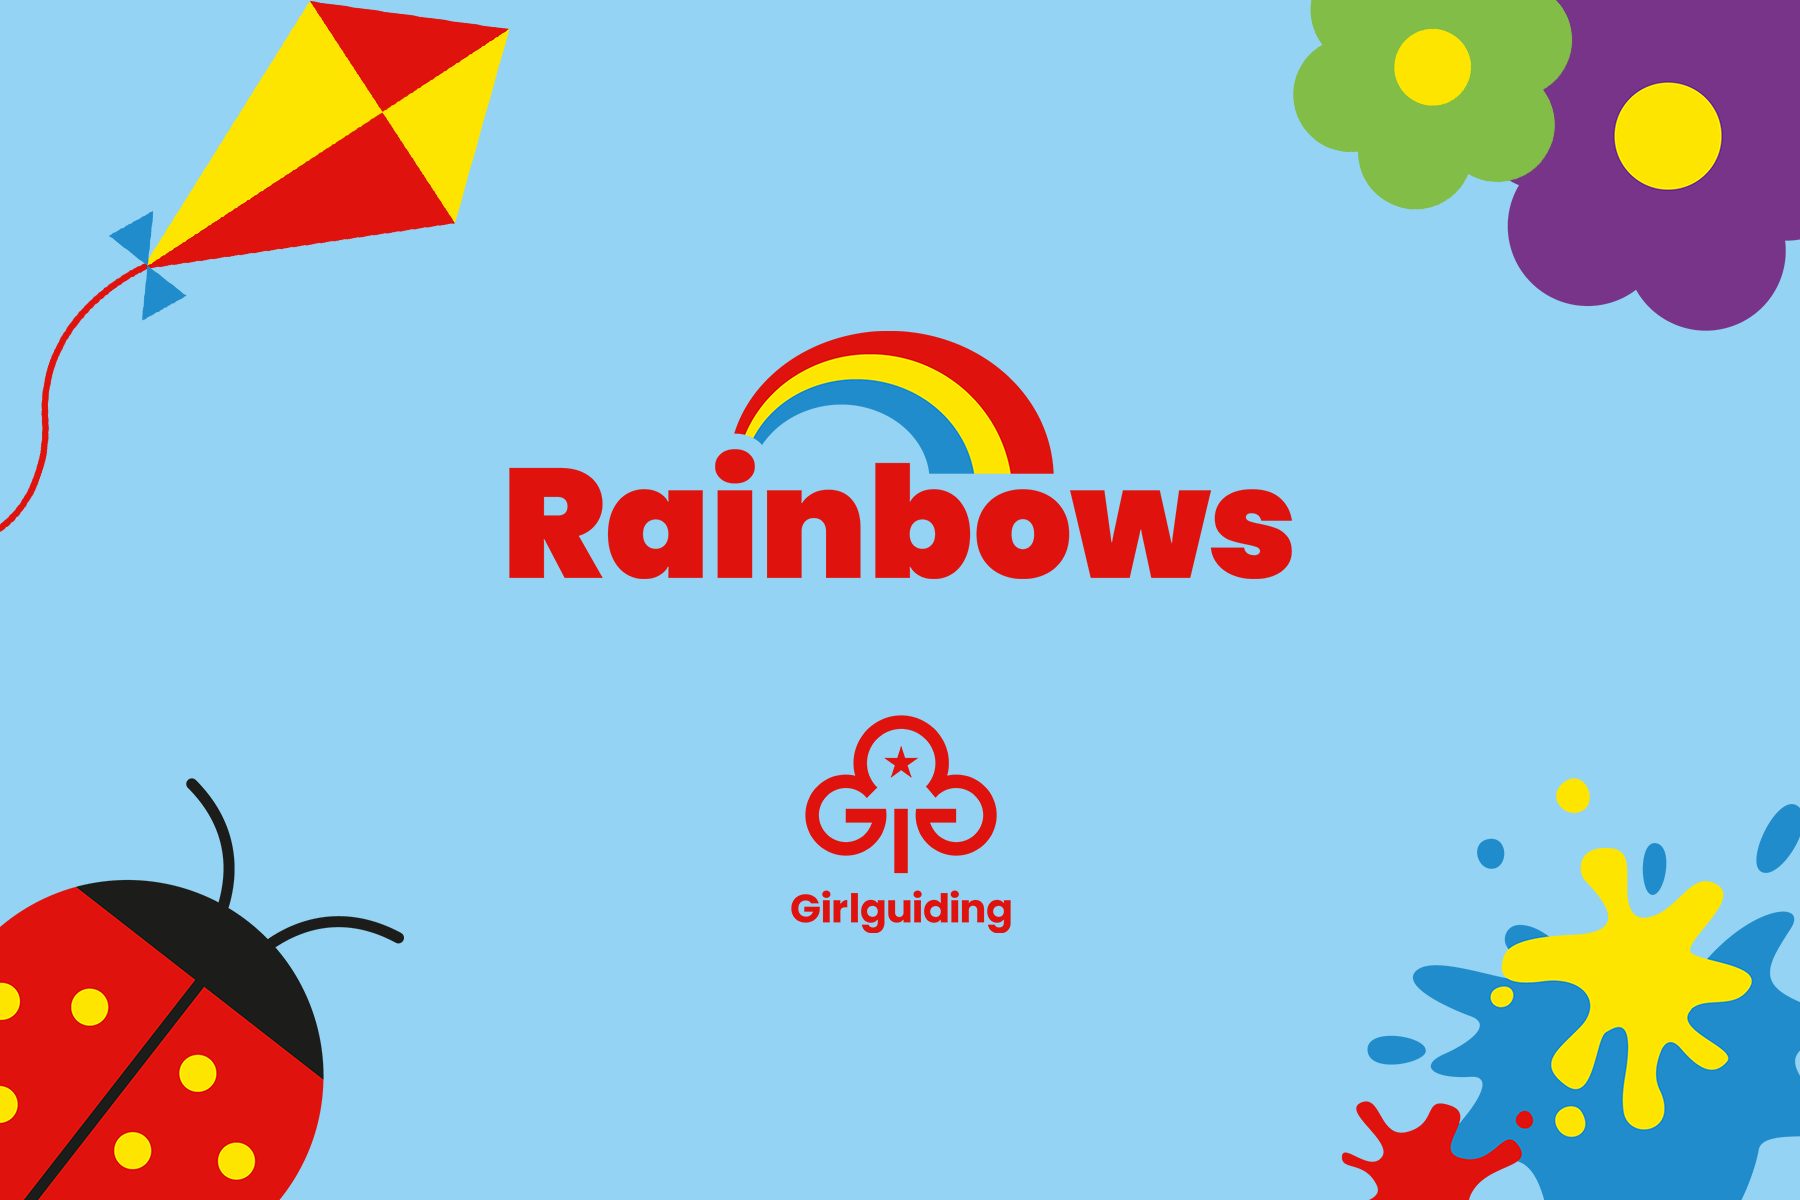 Graphic shows the new Rainbows branding, featuring a red wordmark with a rainbow above it, on a light blue background